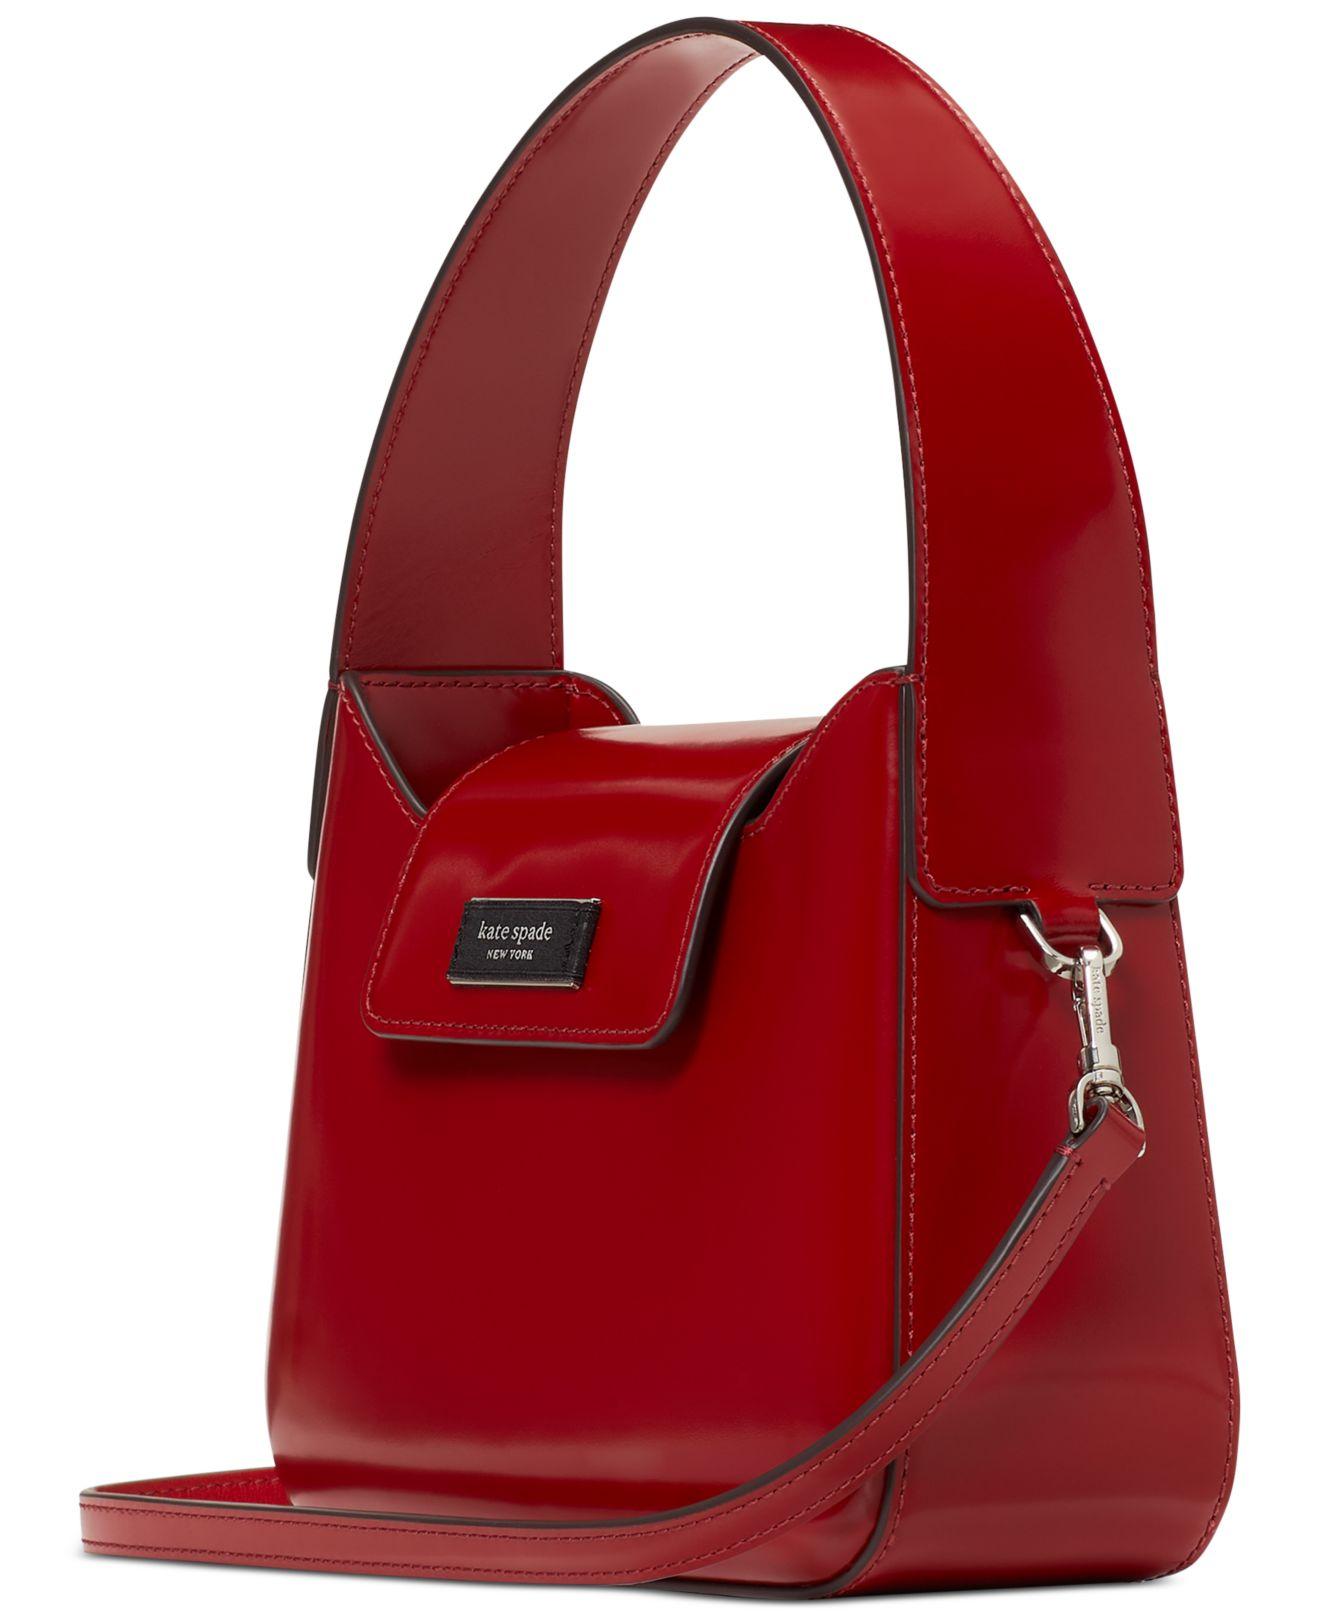 Red Tote Bags | Kate Spade New York